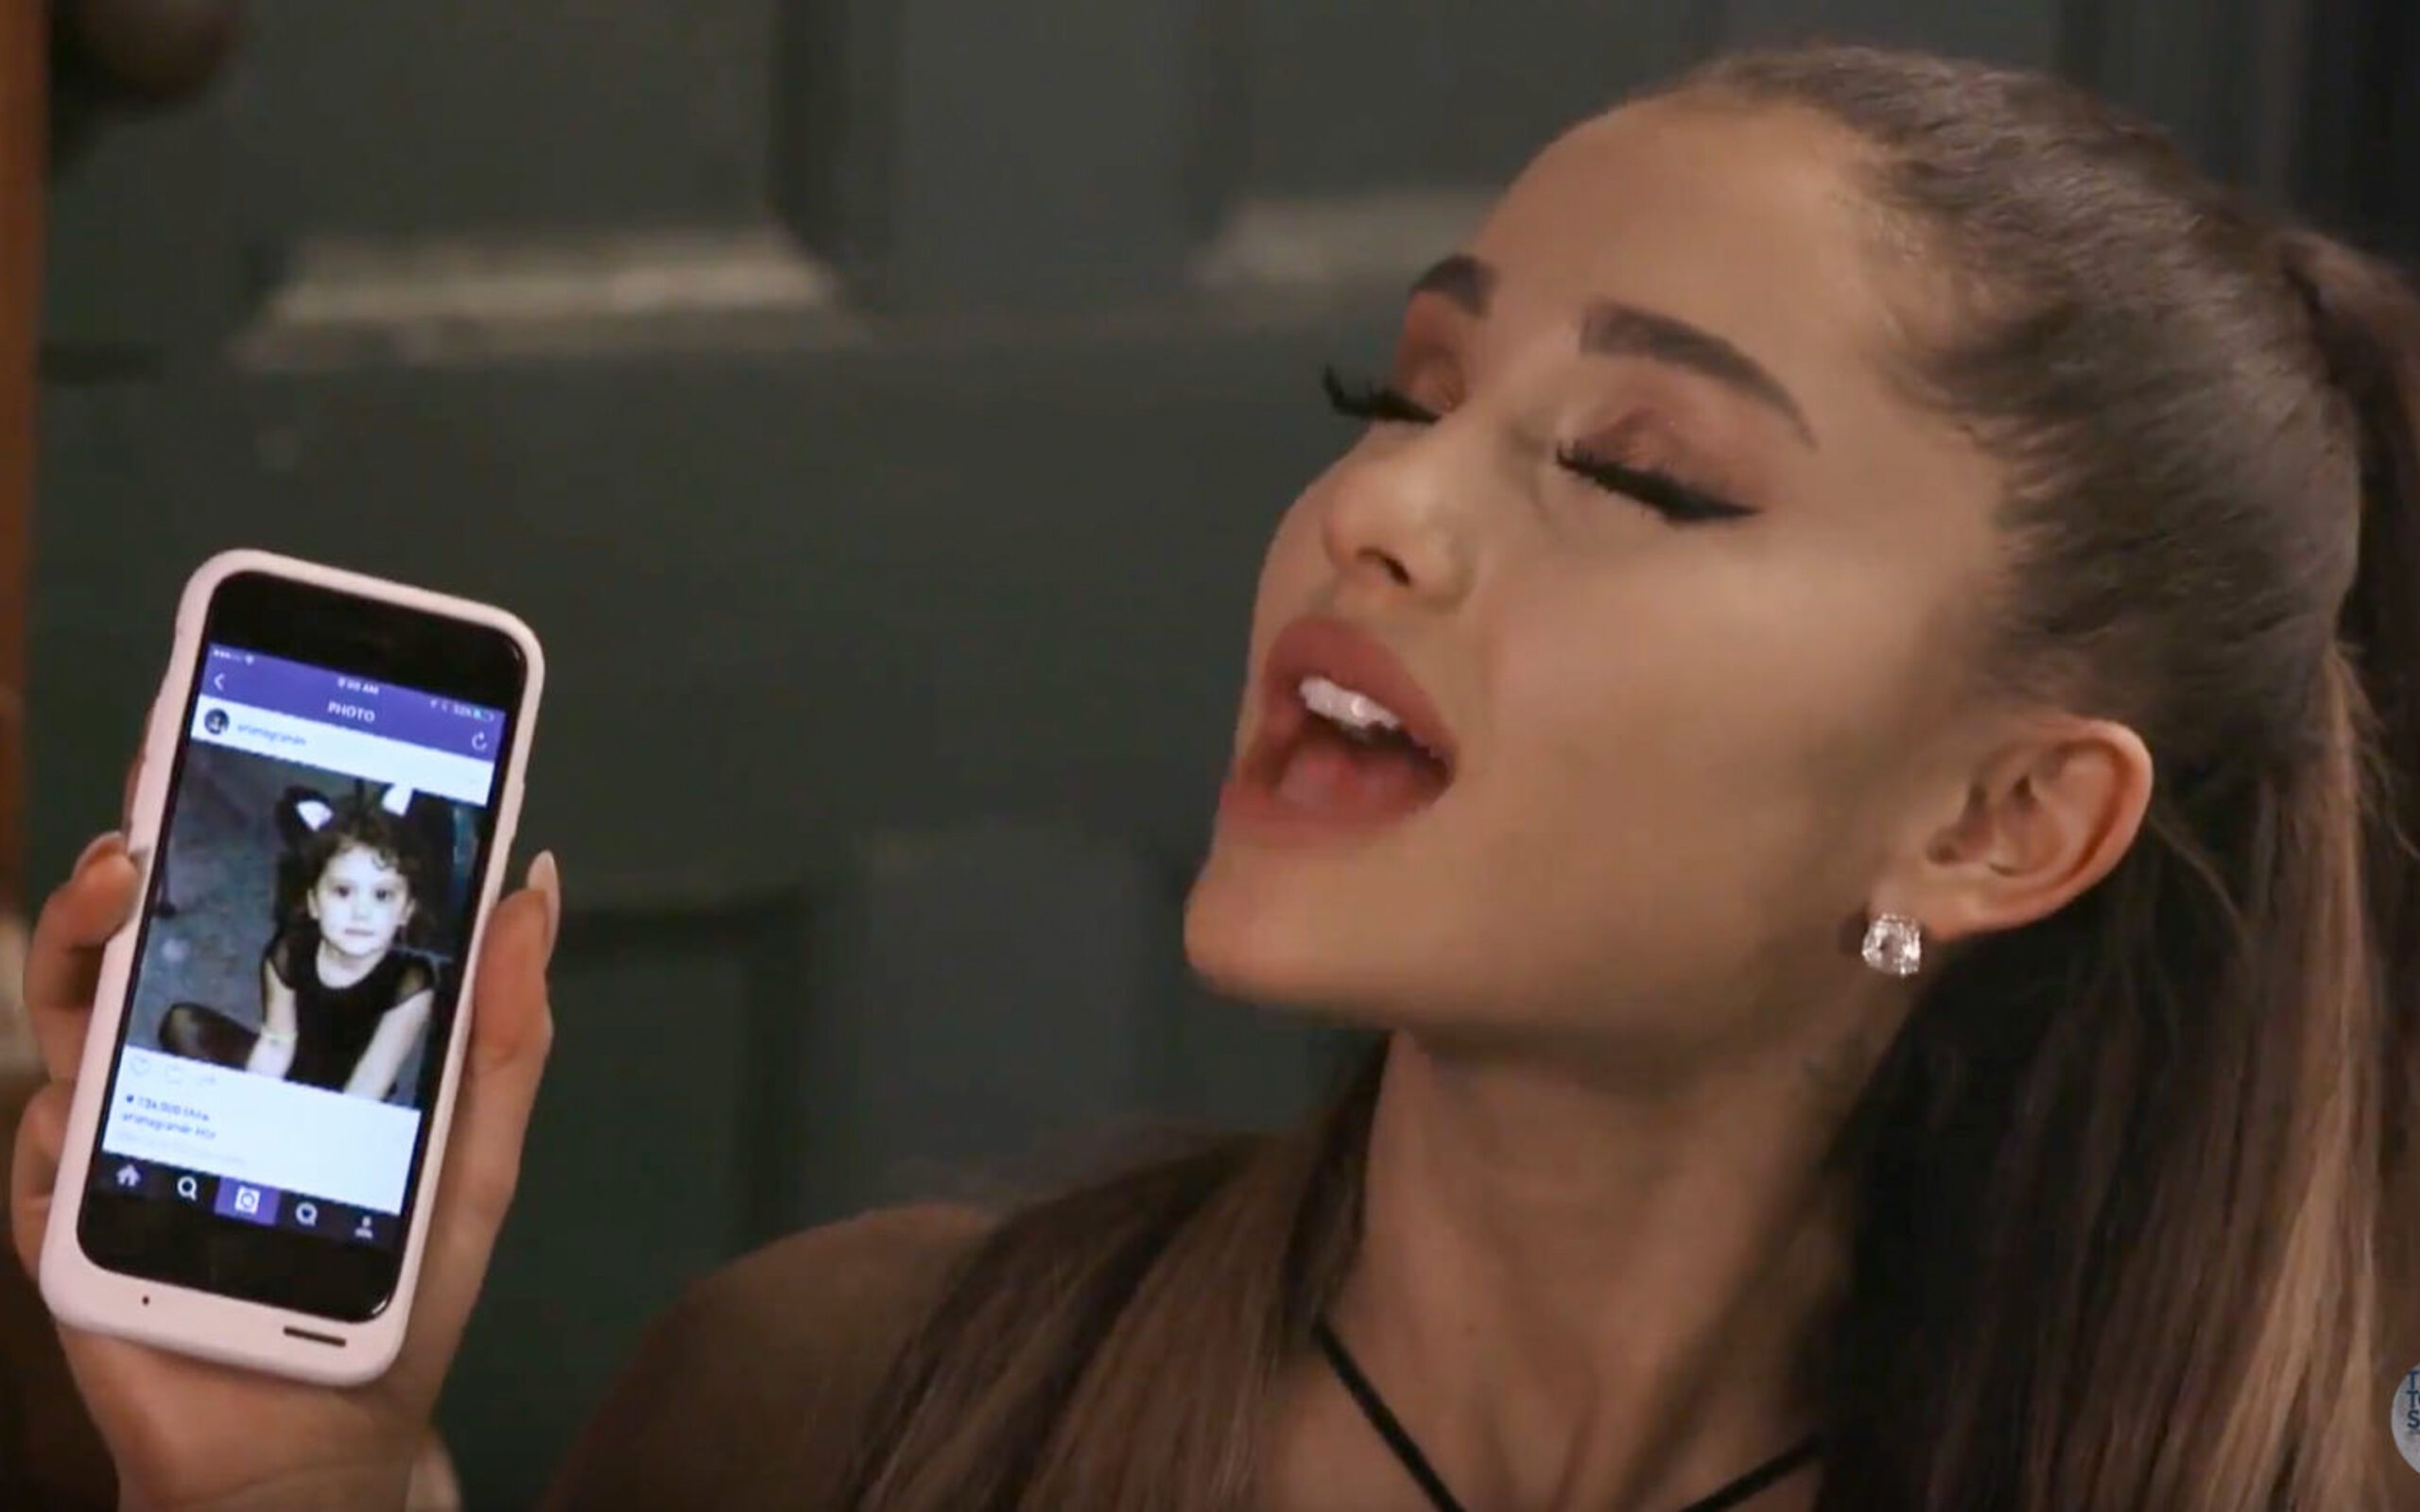 WATCH: Ariana Grande, Jimmy Fallon lip sync a conversation in her dressing room